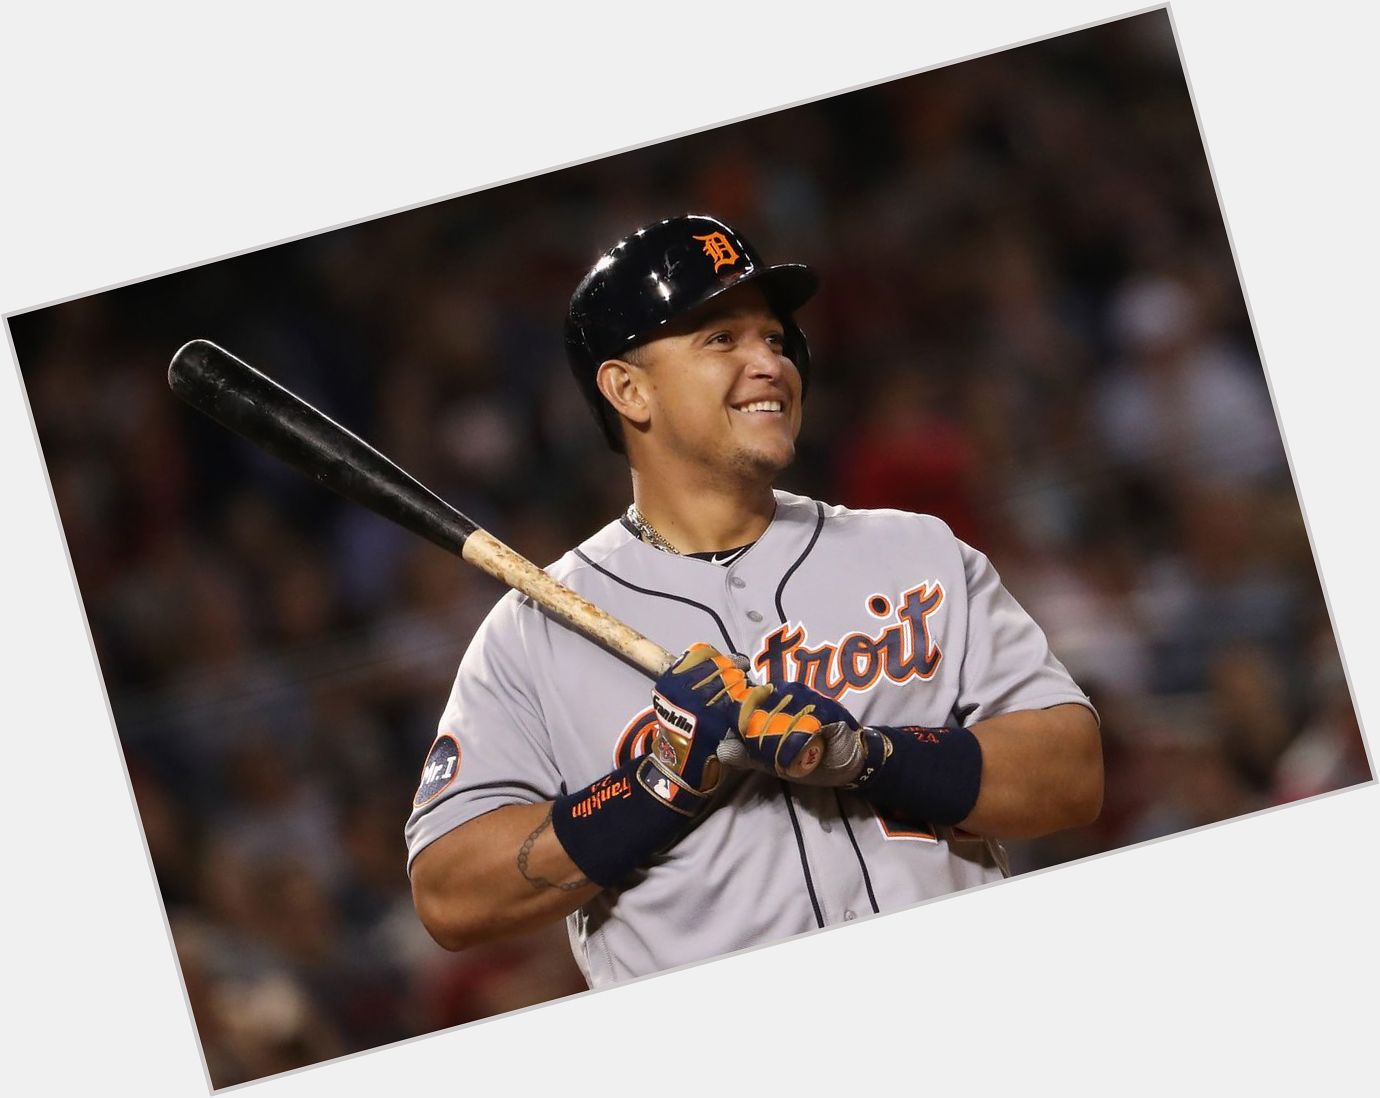 Let\s wish a happy birthday to one of the greats - Miguel Cabrera 